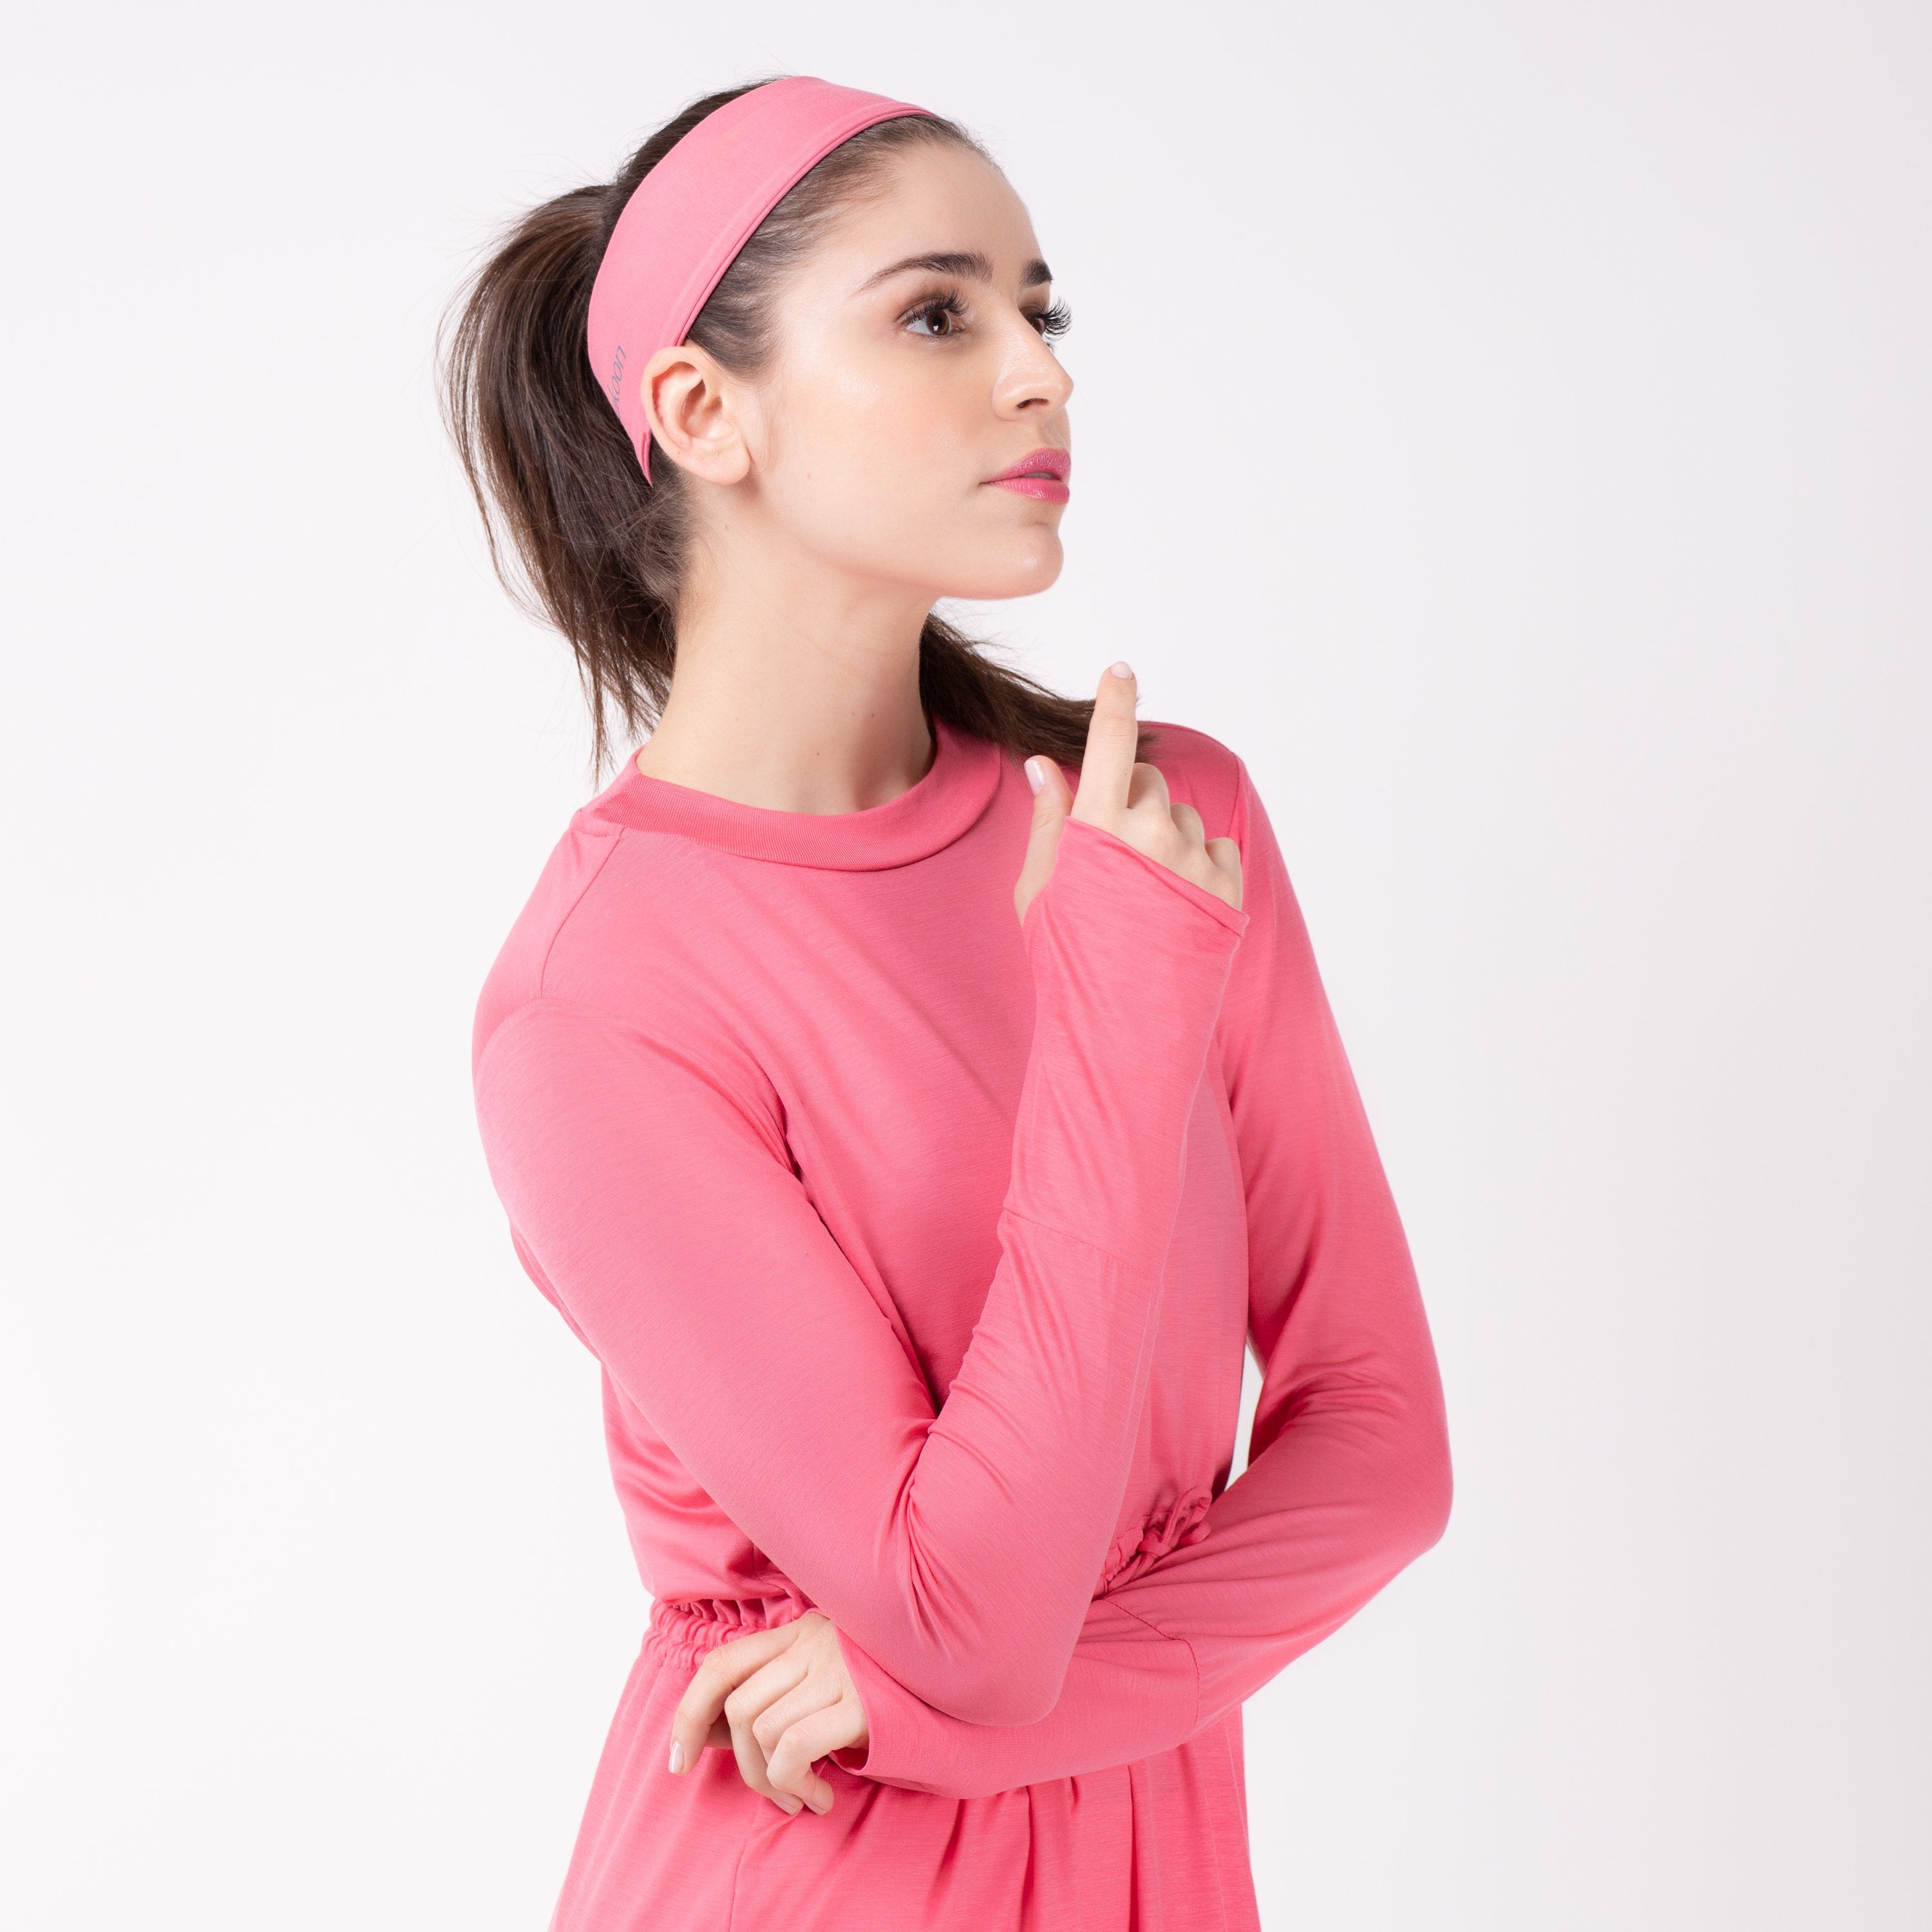 Woman looking right in pink shirt with matching pink HAWA headband.